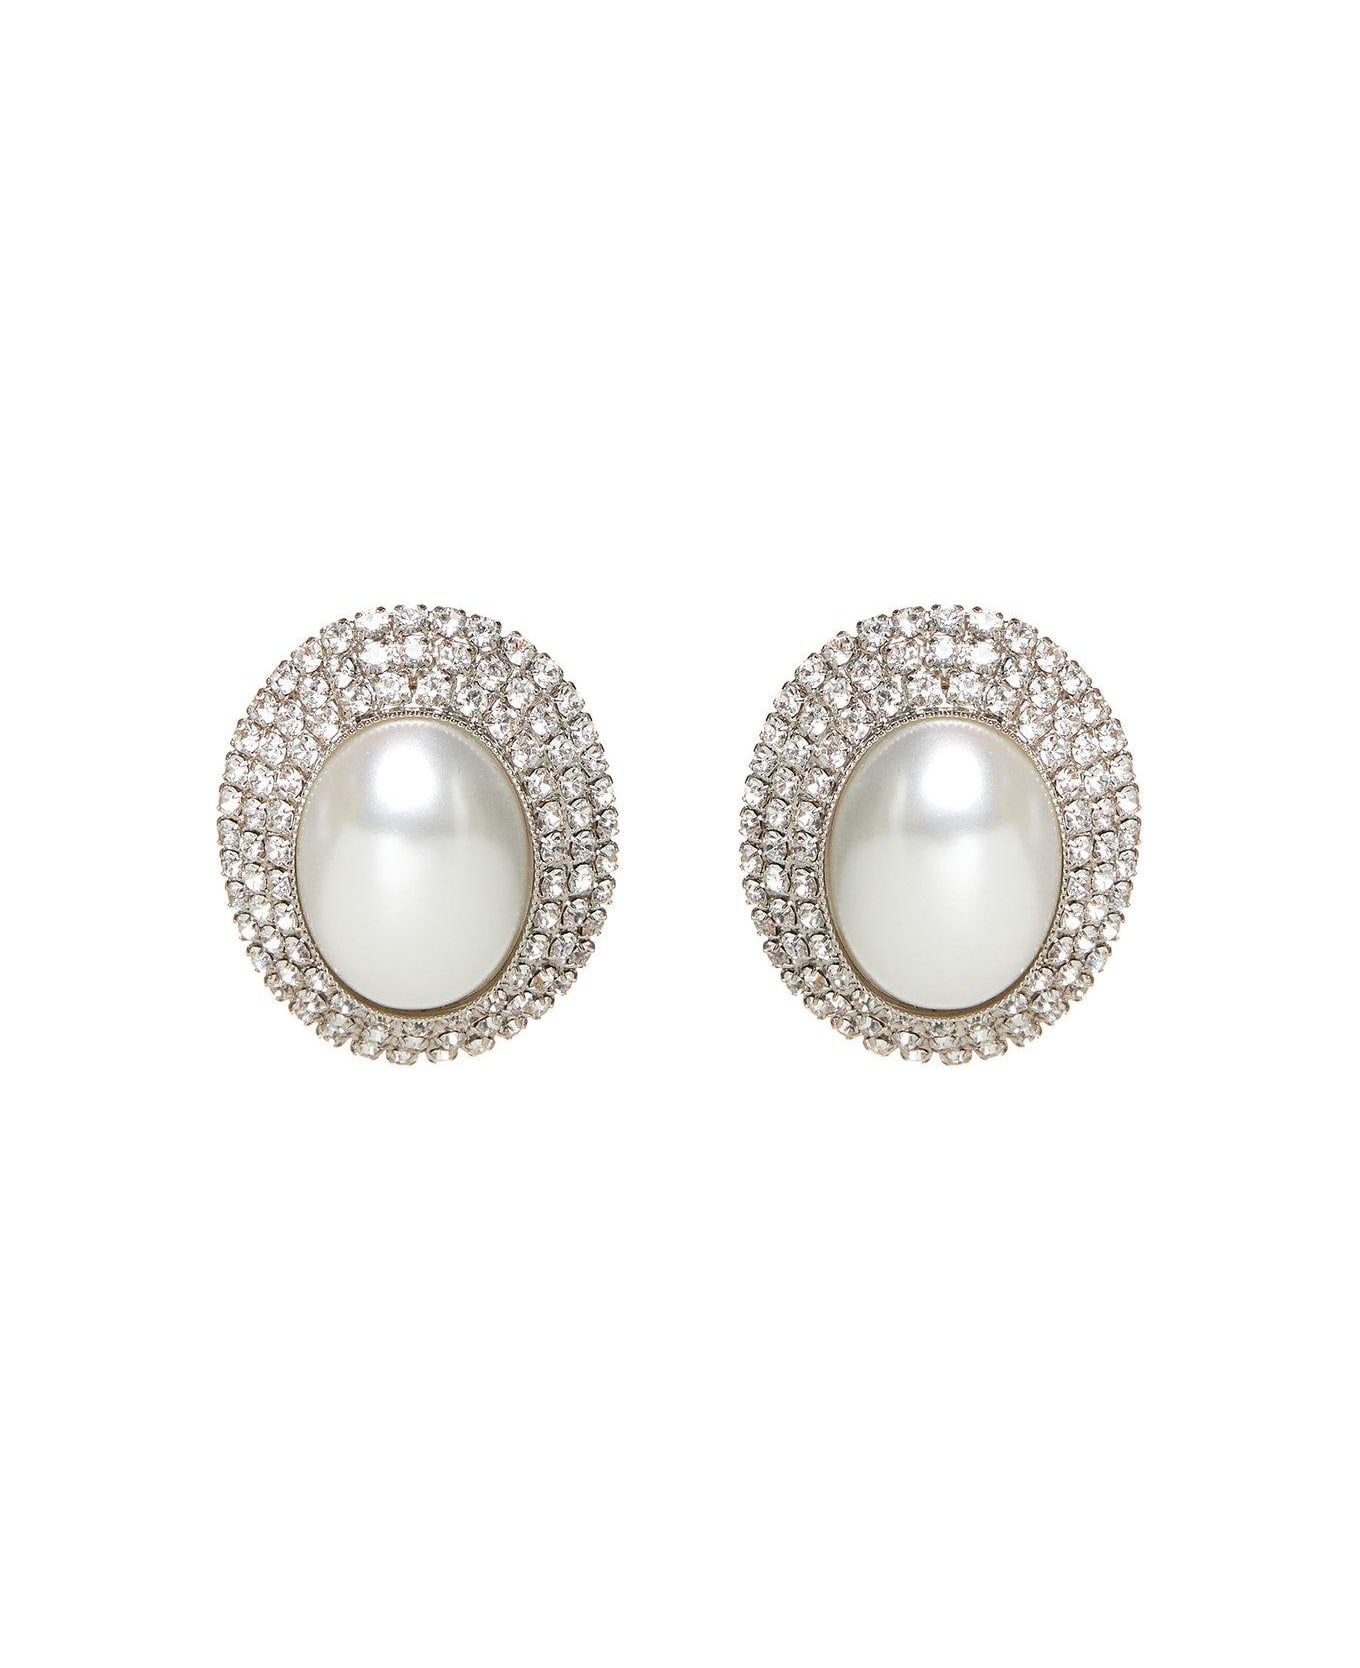 Alessandra Rich Embellished Clip-on Earrings - Silver イヤリング